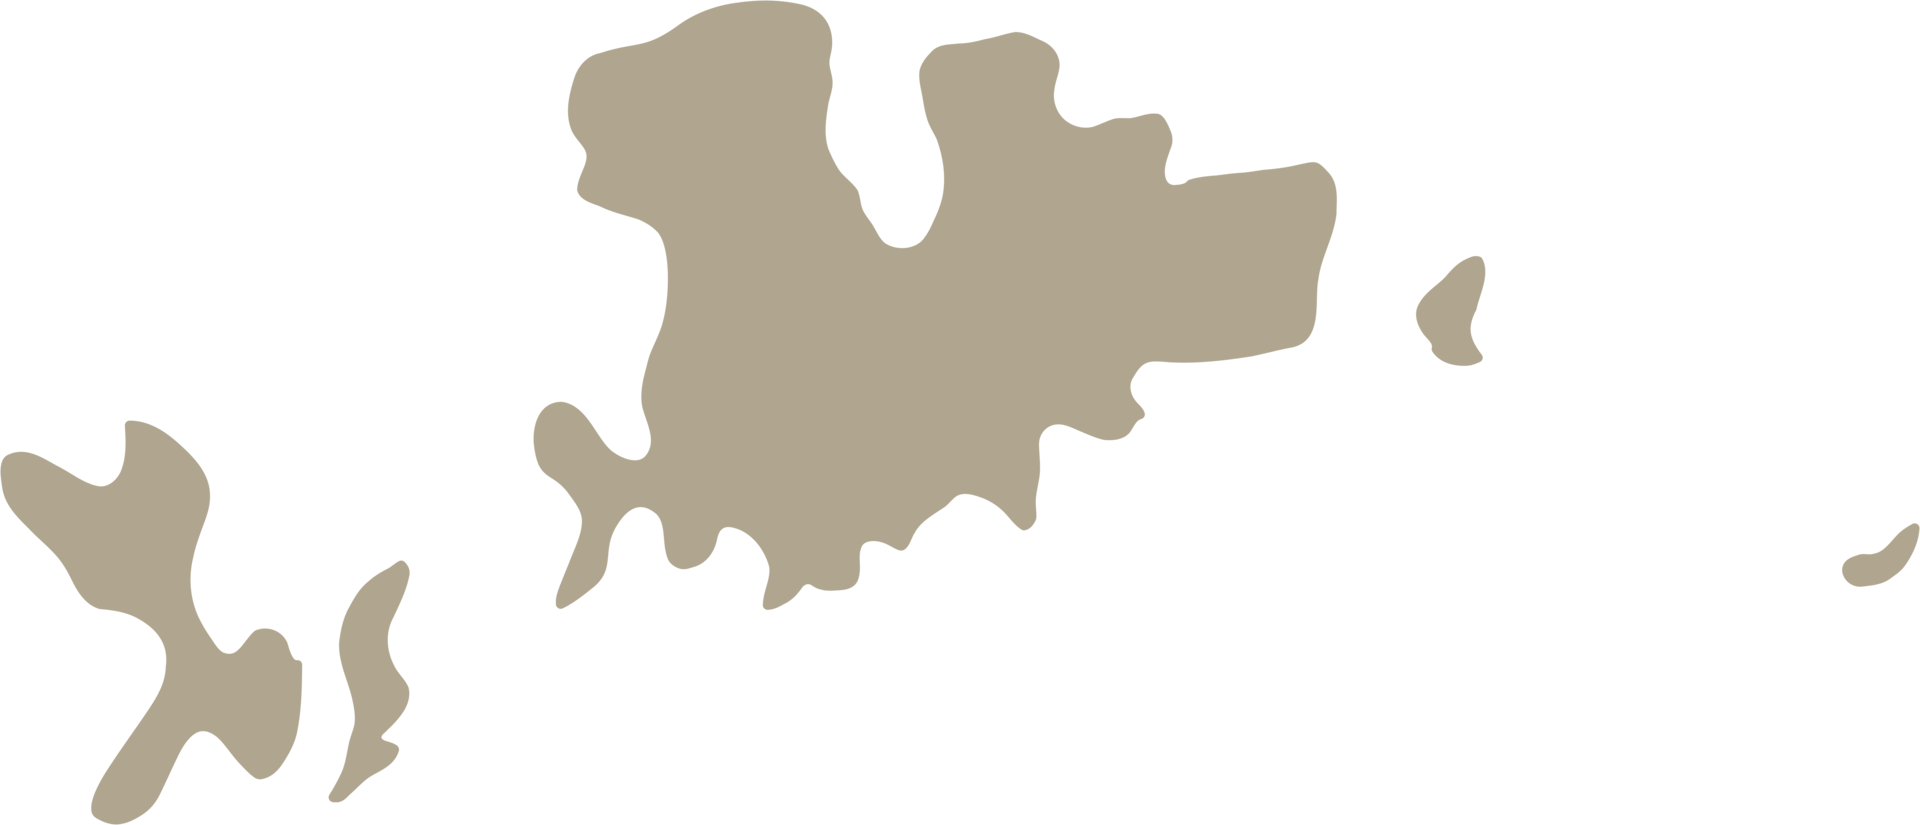 doodle freehand drawing of mykonos island map. png